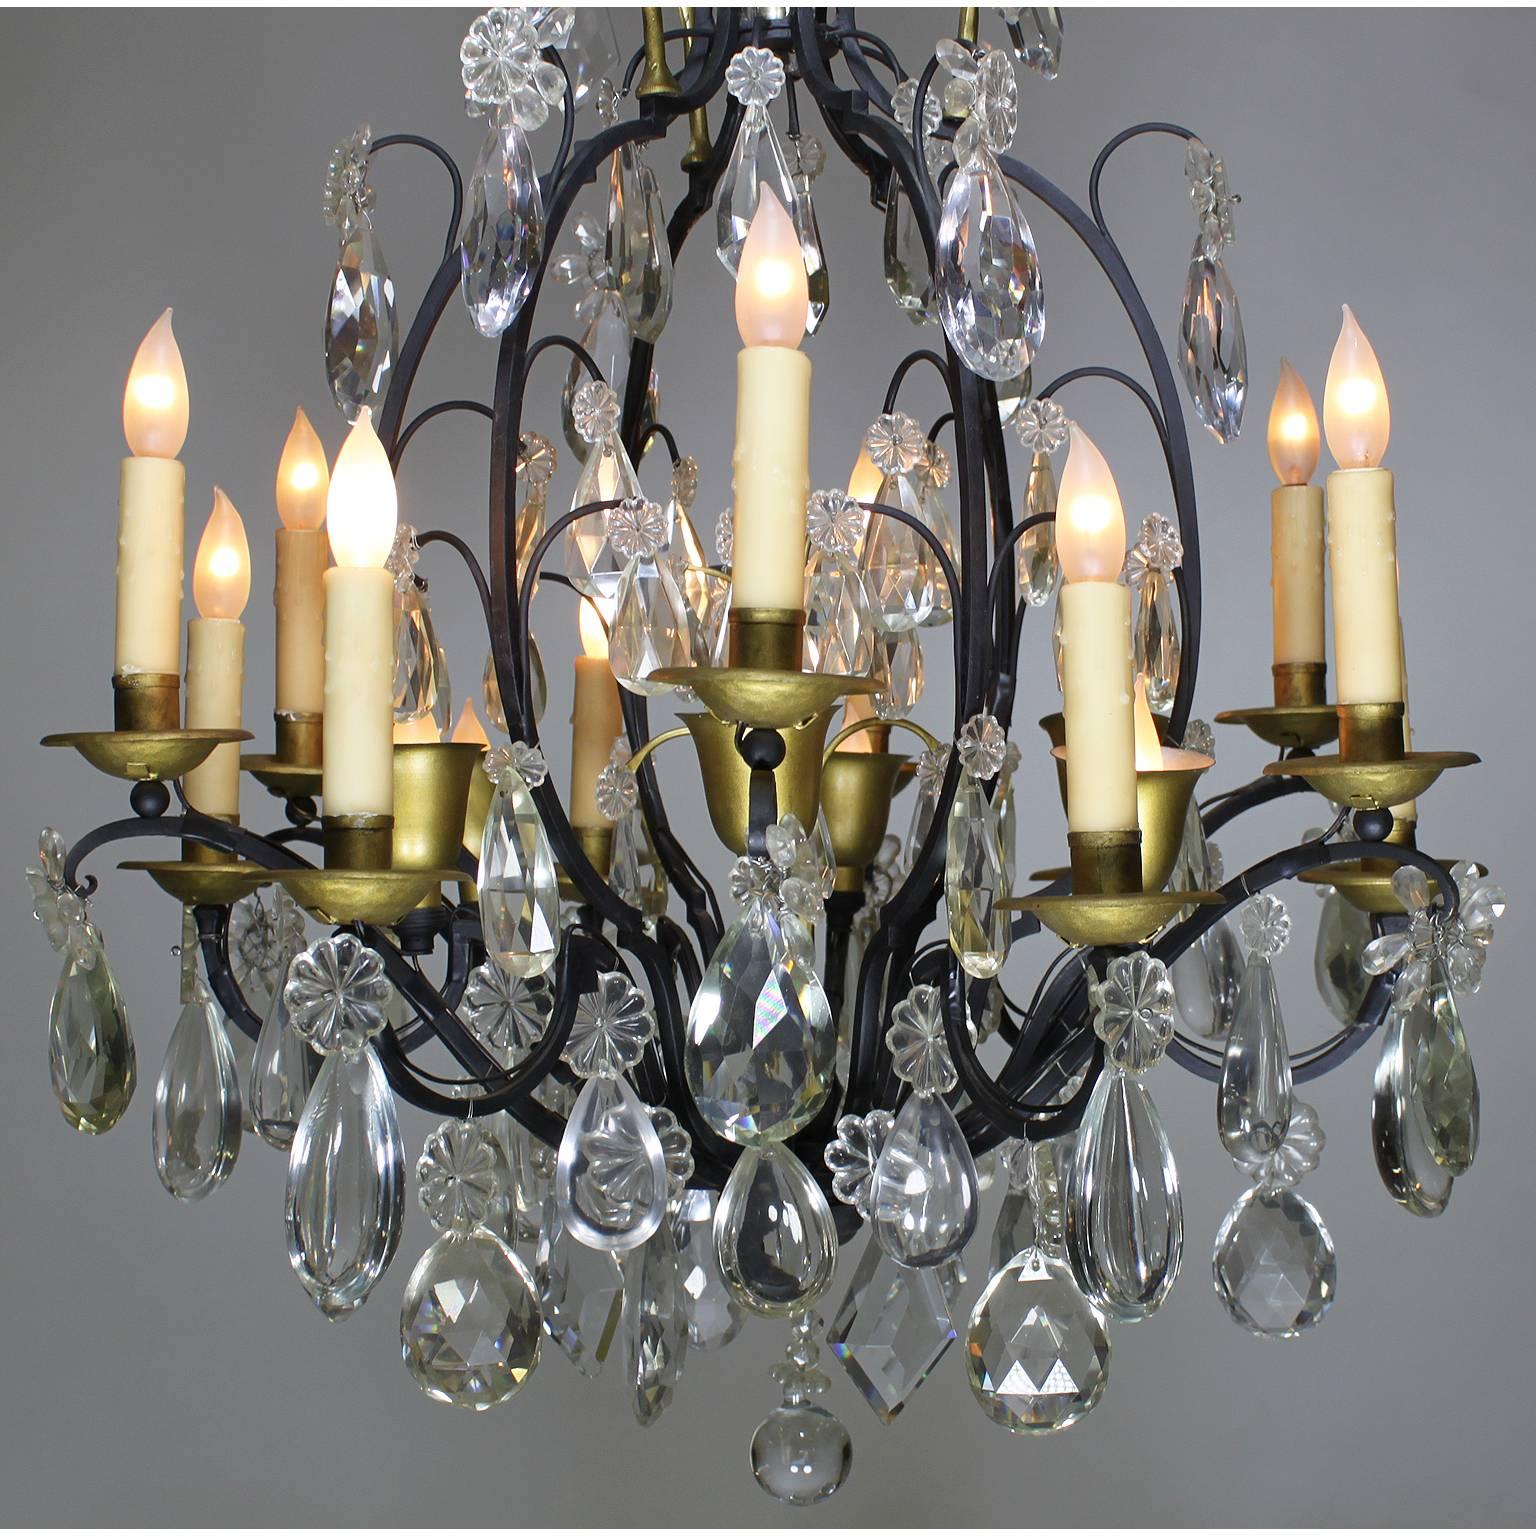 French 19th-20th Century Louis XV Style Wrought Iron Eighteen-Light Crystal Chandelier For Sale